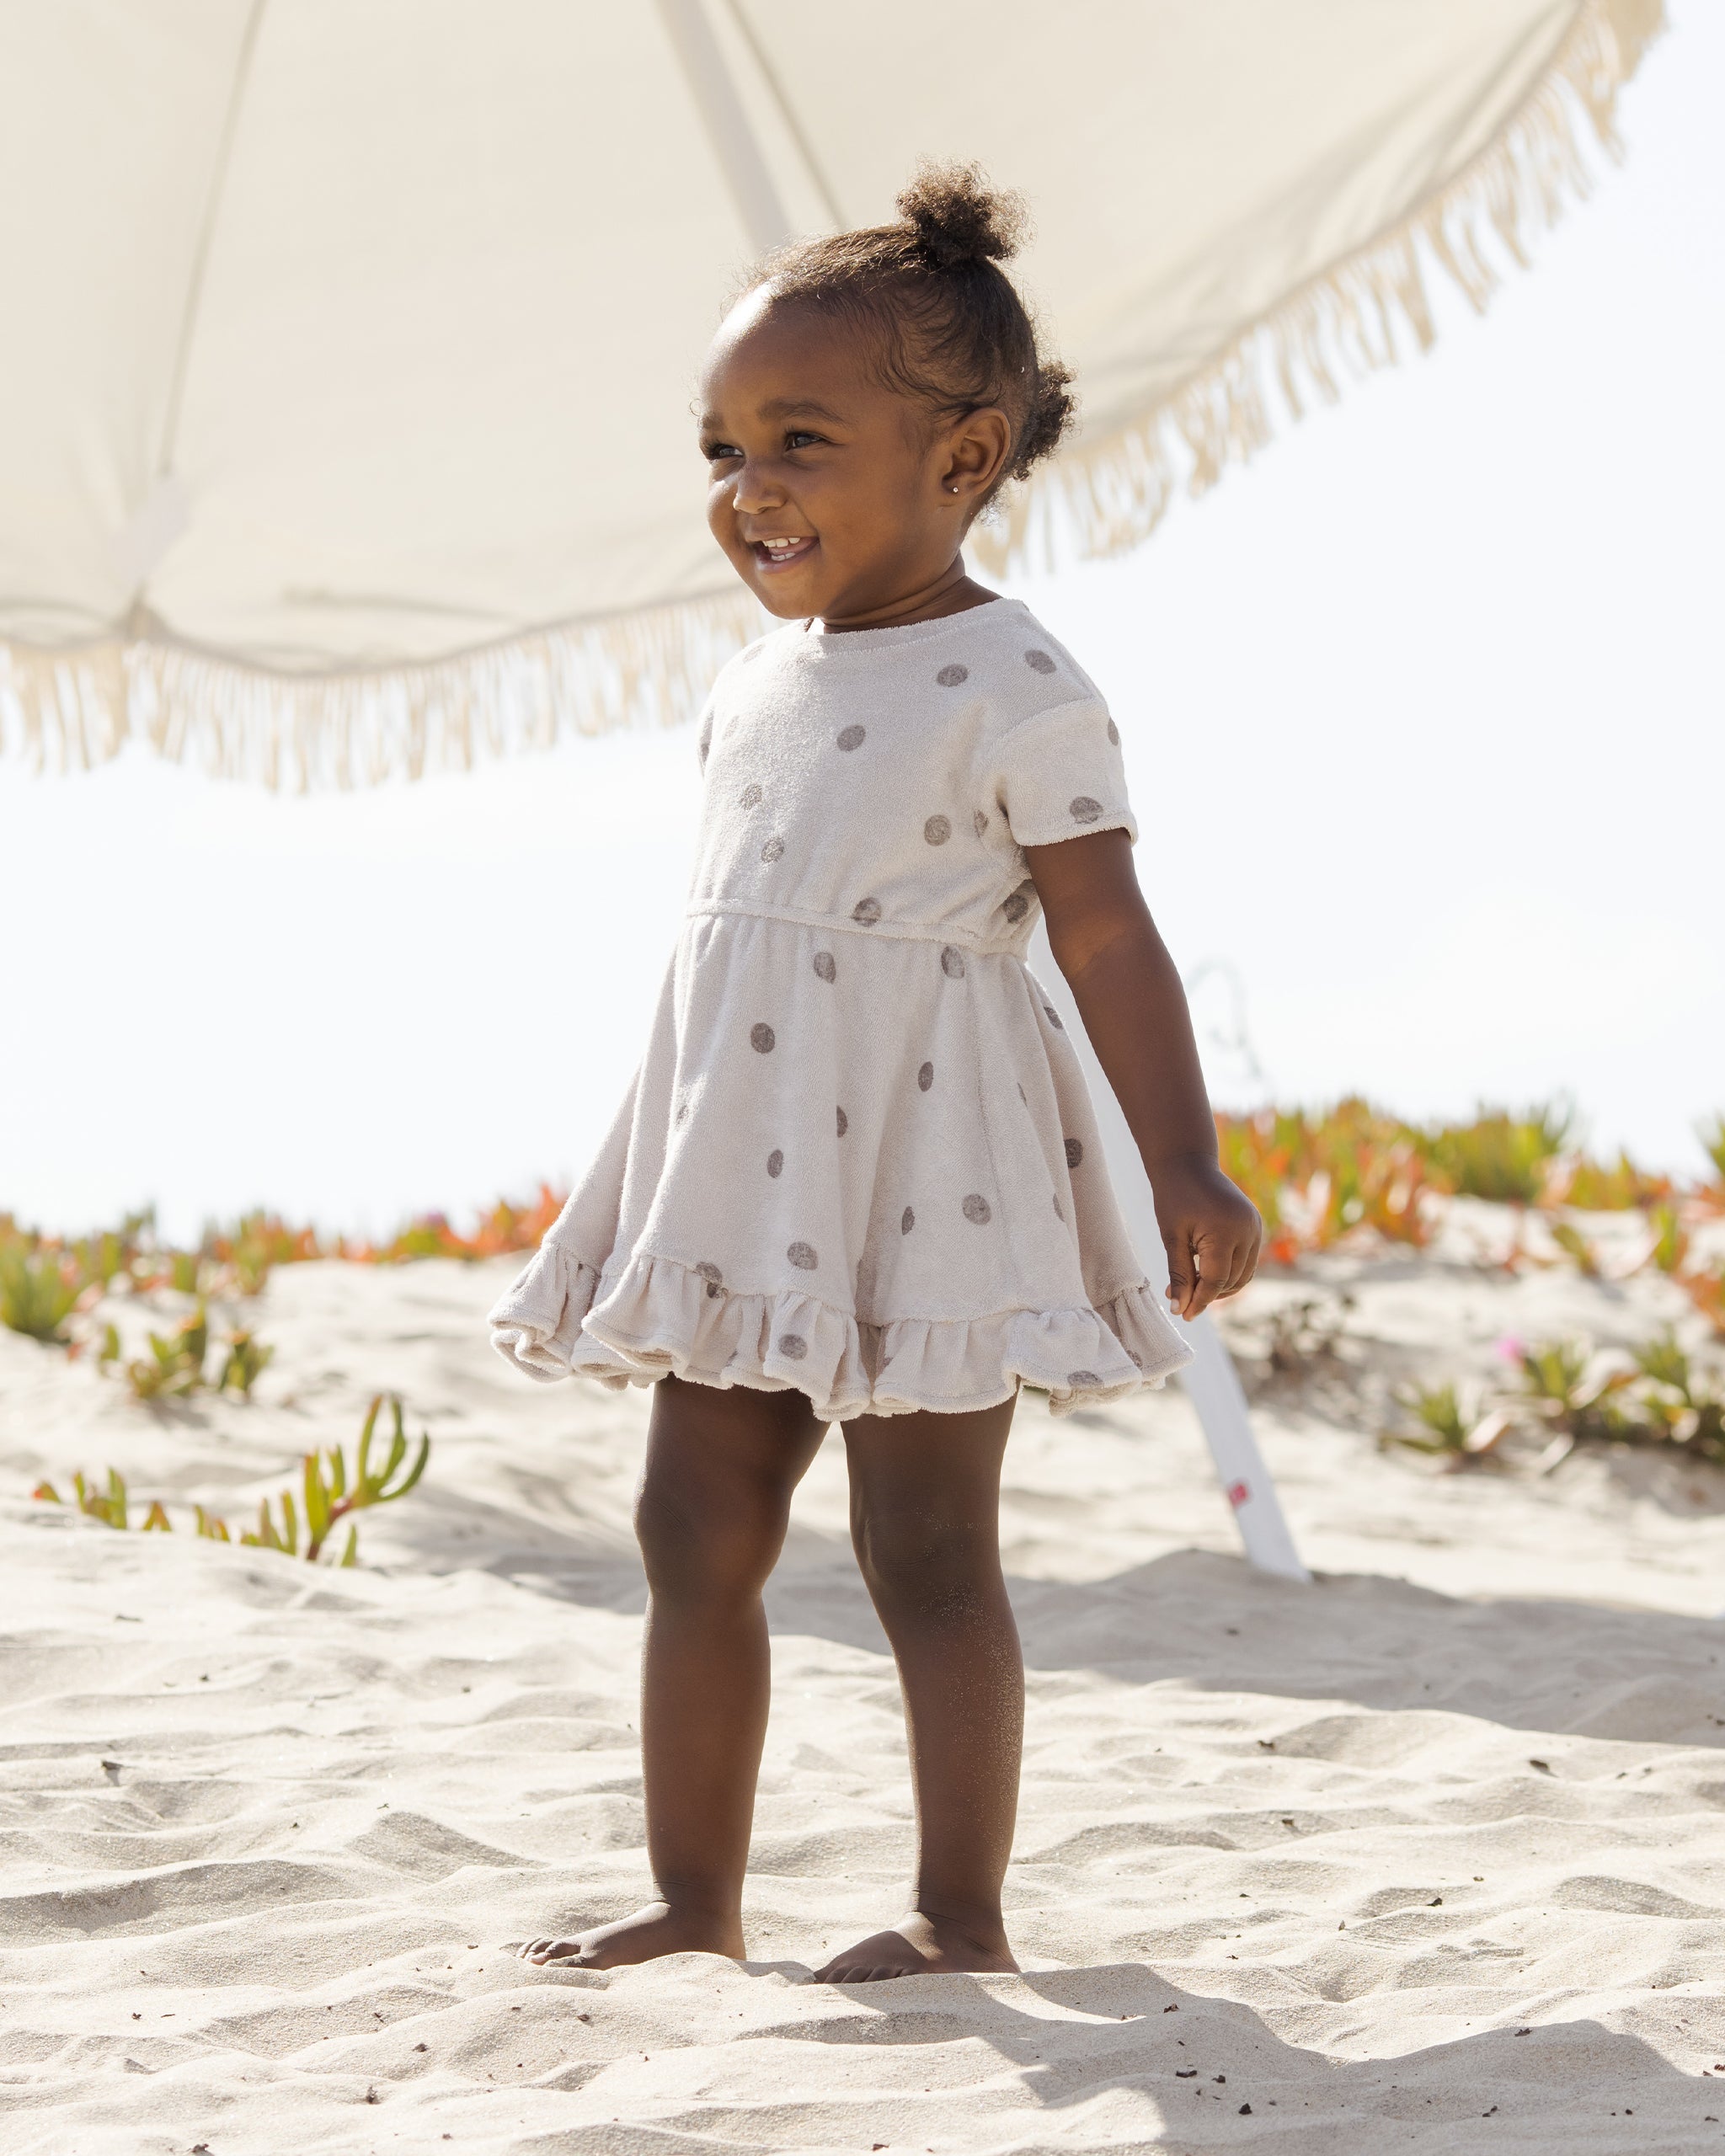 Terry Dress || Polka Dot - Rylee + Cru | Kids Clothes | Trendy Baby Clothes | Modern Infant Outfits |